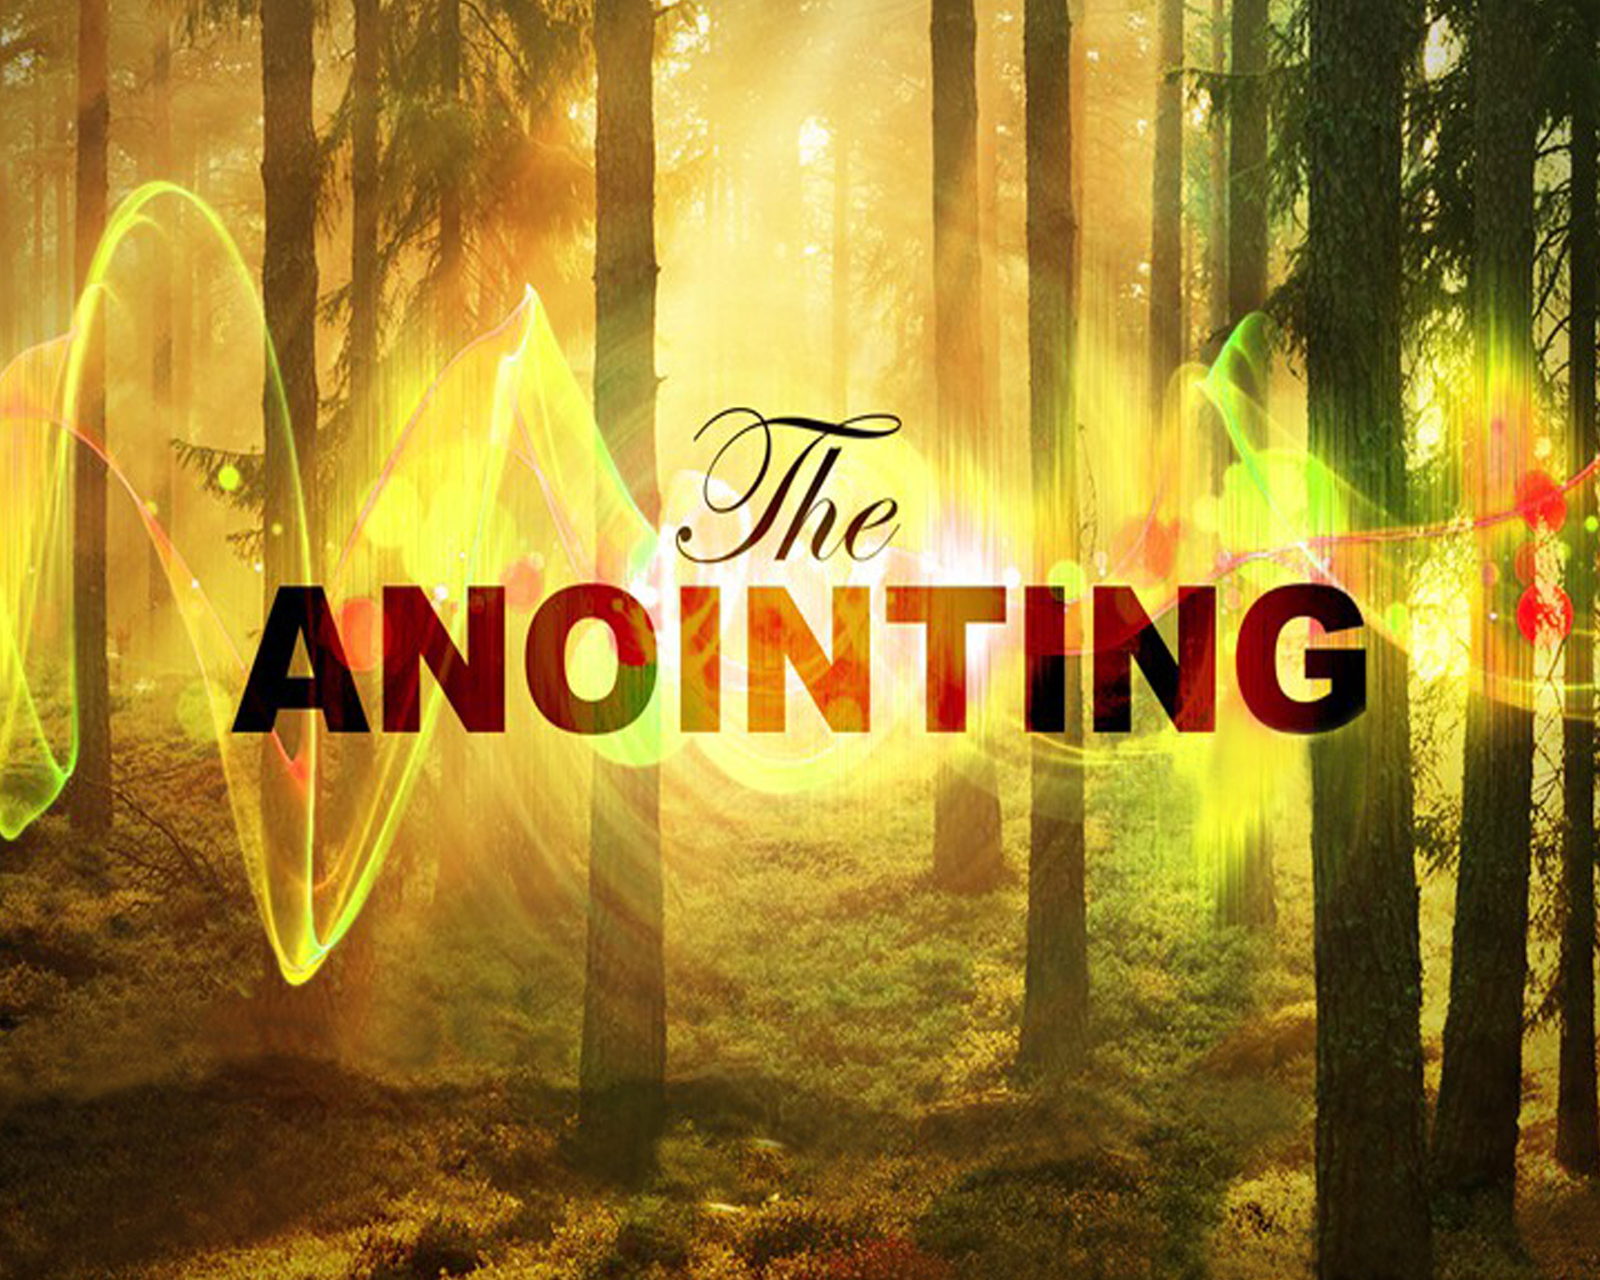 Understanding the Anointing